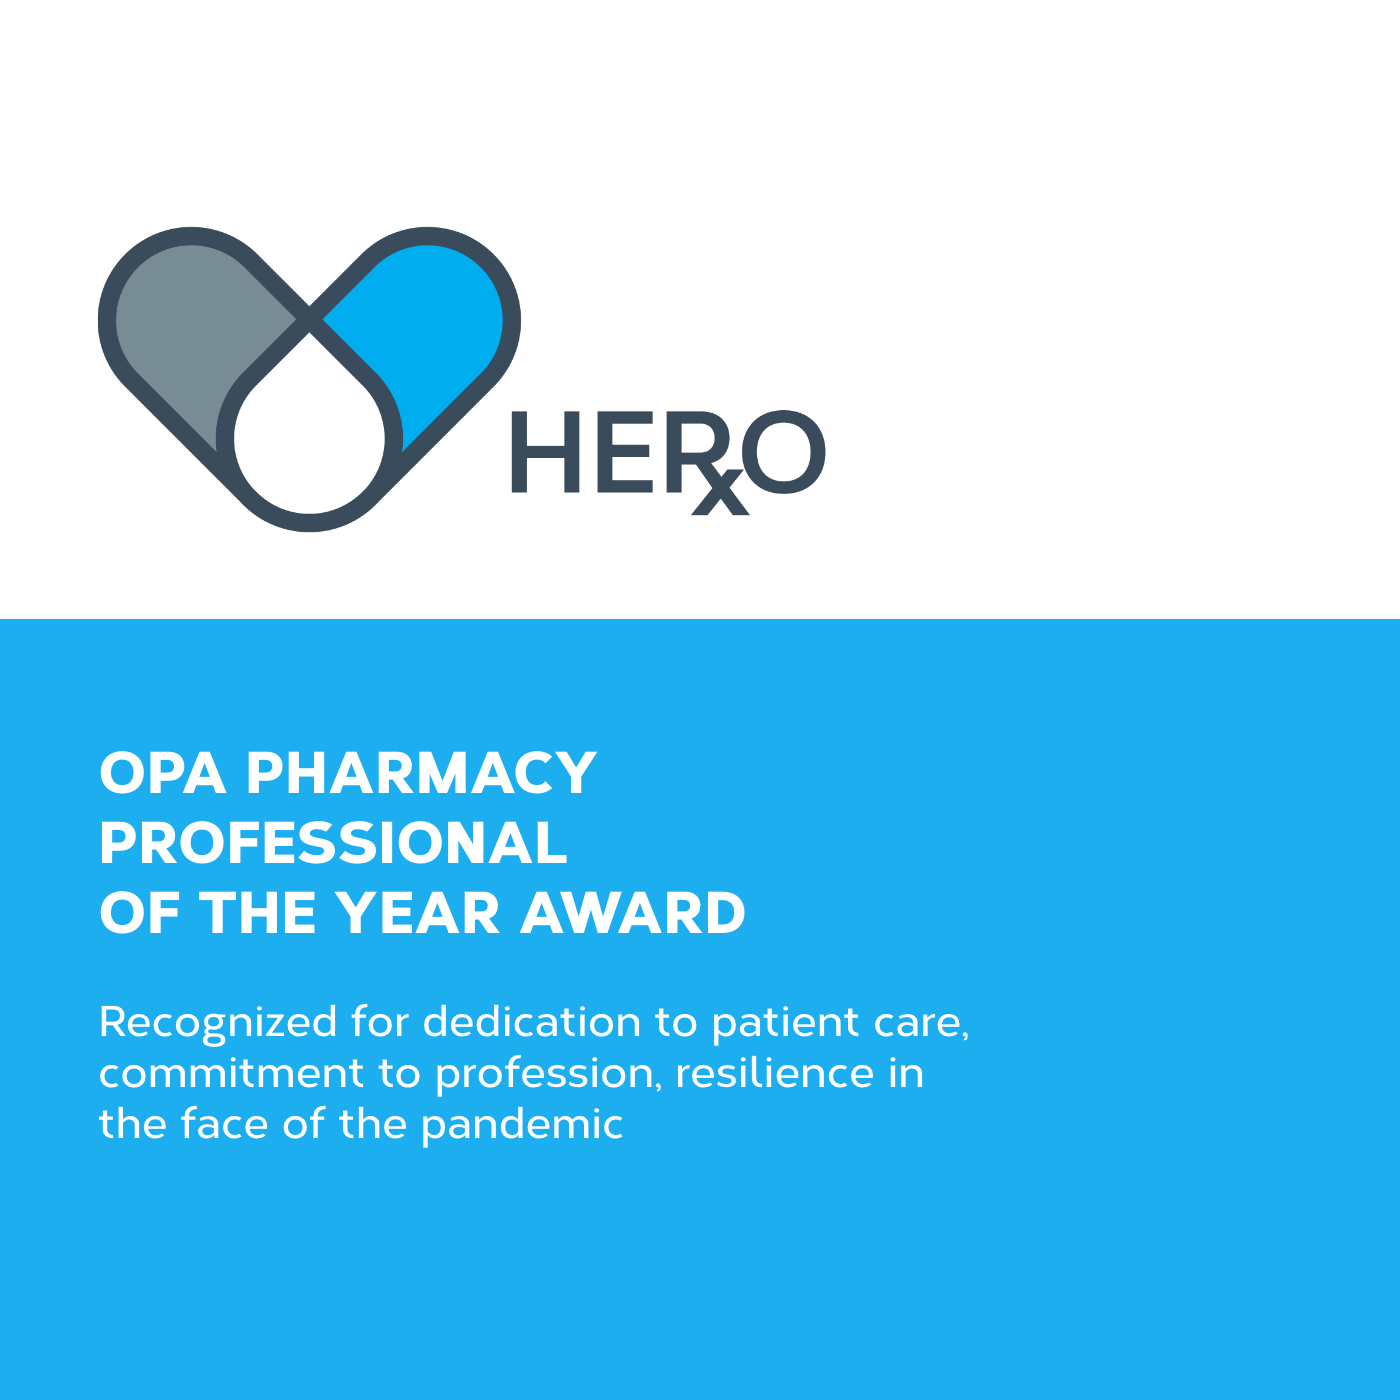 OPA Pharmacy Professional of the Year Awards